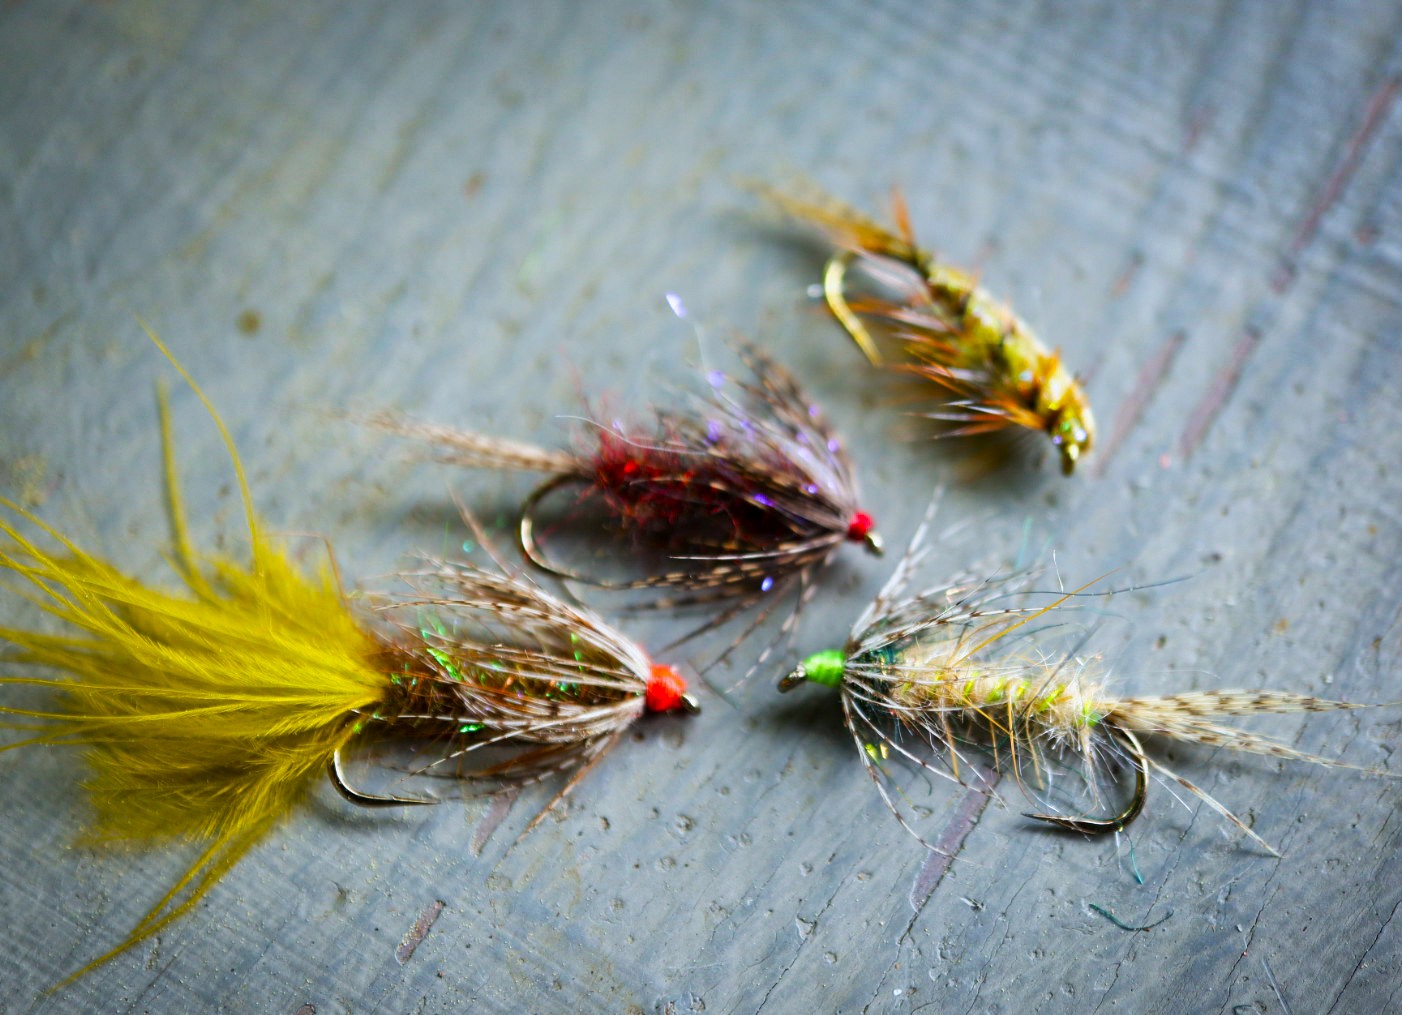  The Fly Fishing Place Basics Collection - Kaufmann's Stonefly  Nymph Assortment - 10 Bead Head Rubber Legs Wet Flies - 5 Patterns - Hook  Sizes 4, 6, 8, 10, and 12 : Sports & Outdoors